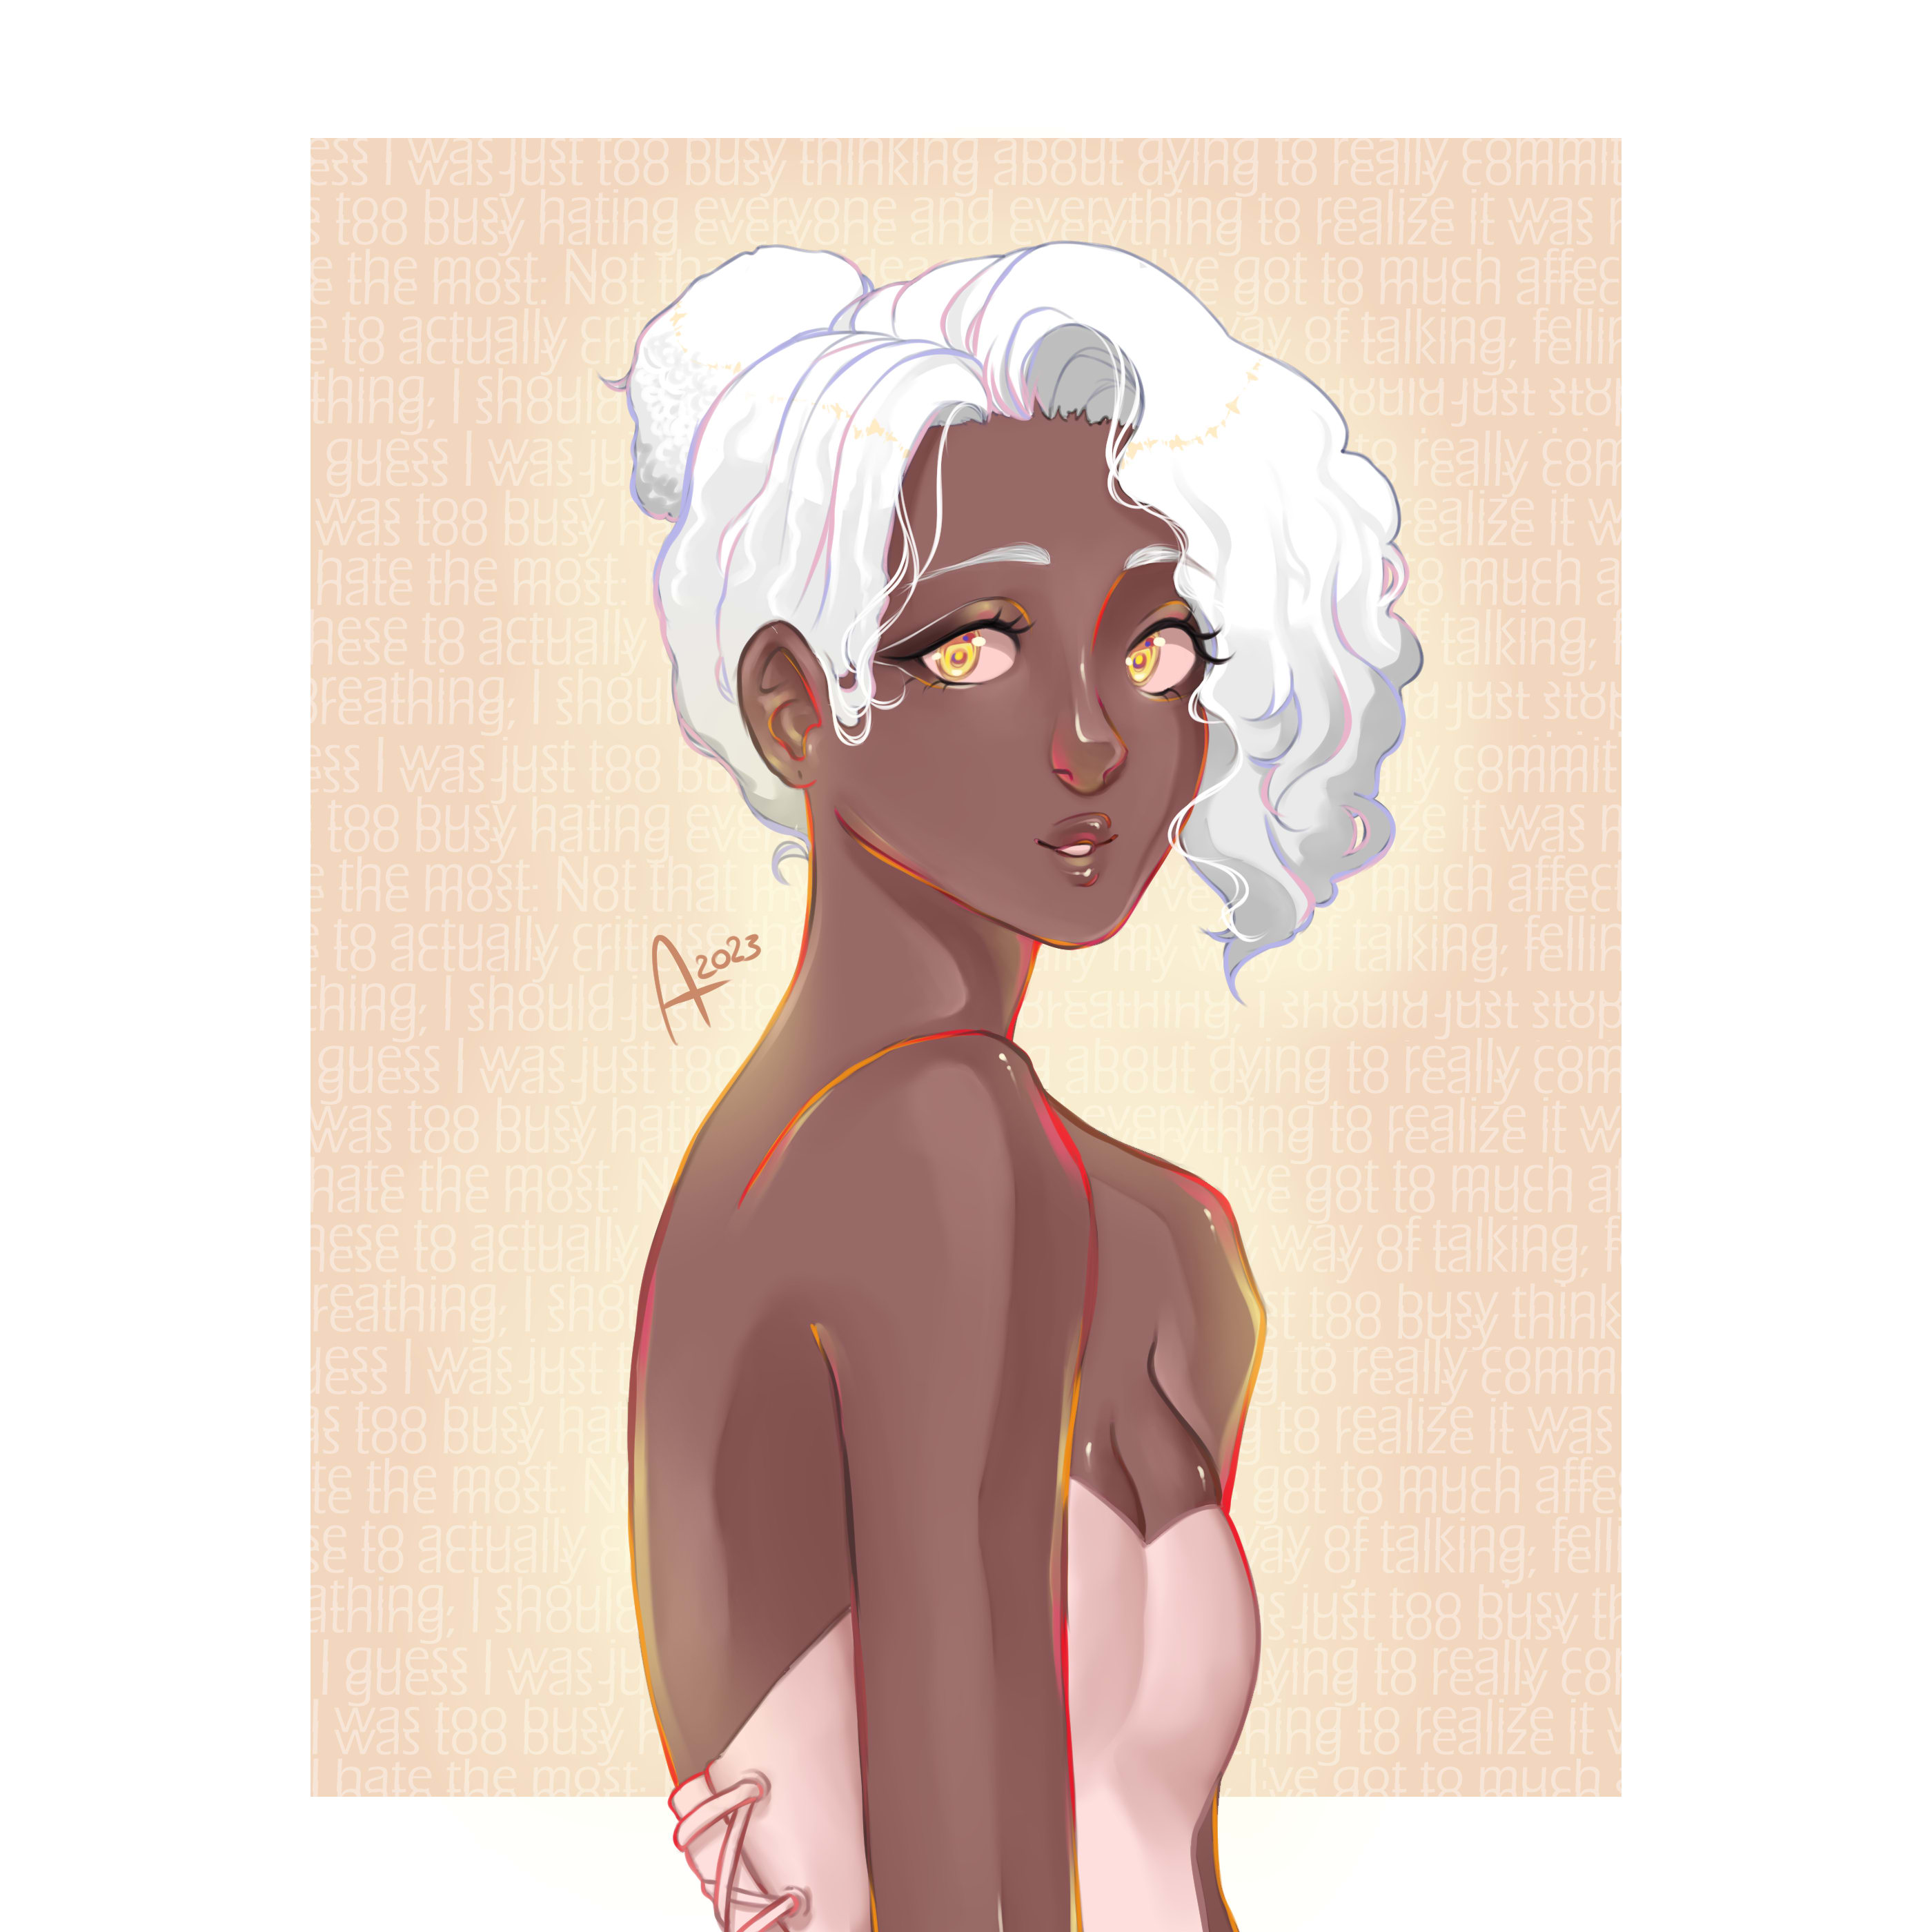 wanted to draw @acrylicqueen's human design of